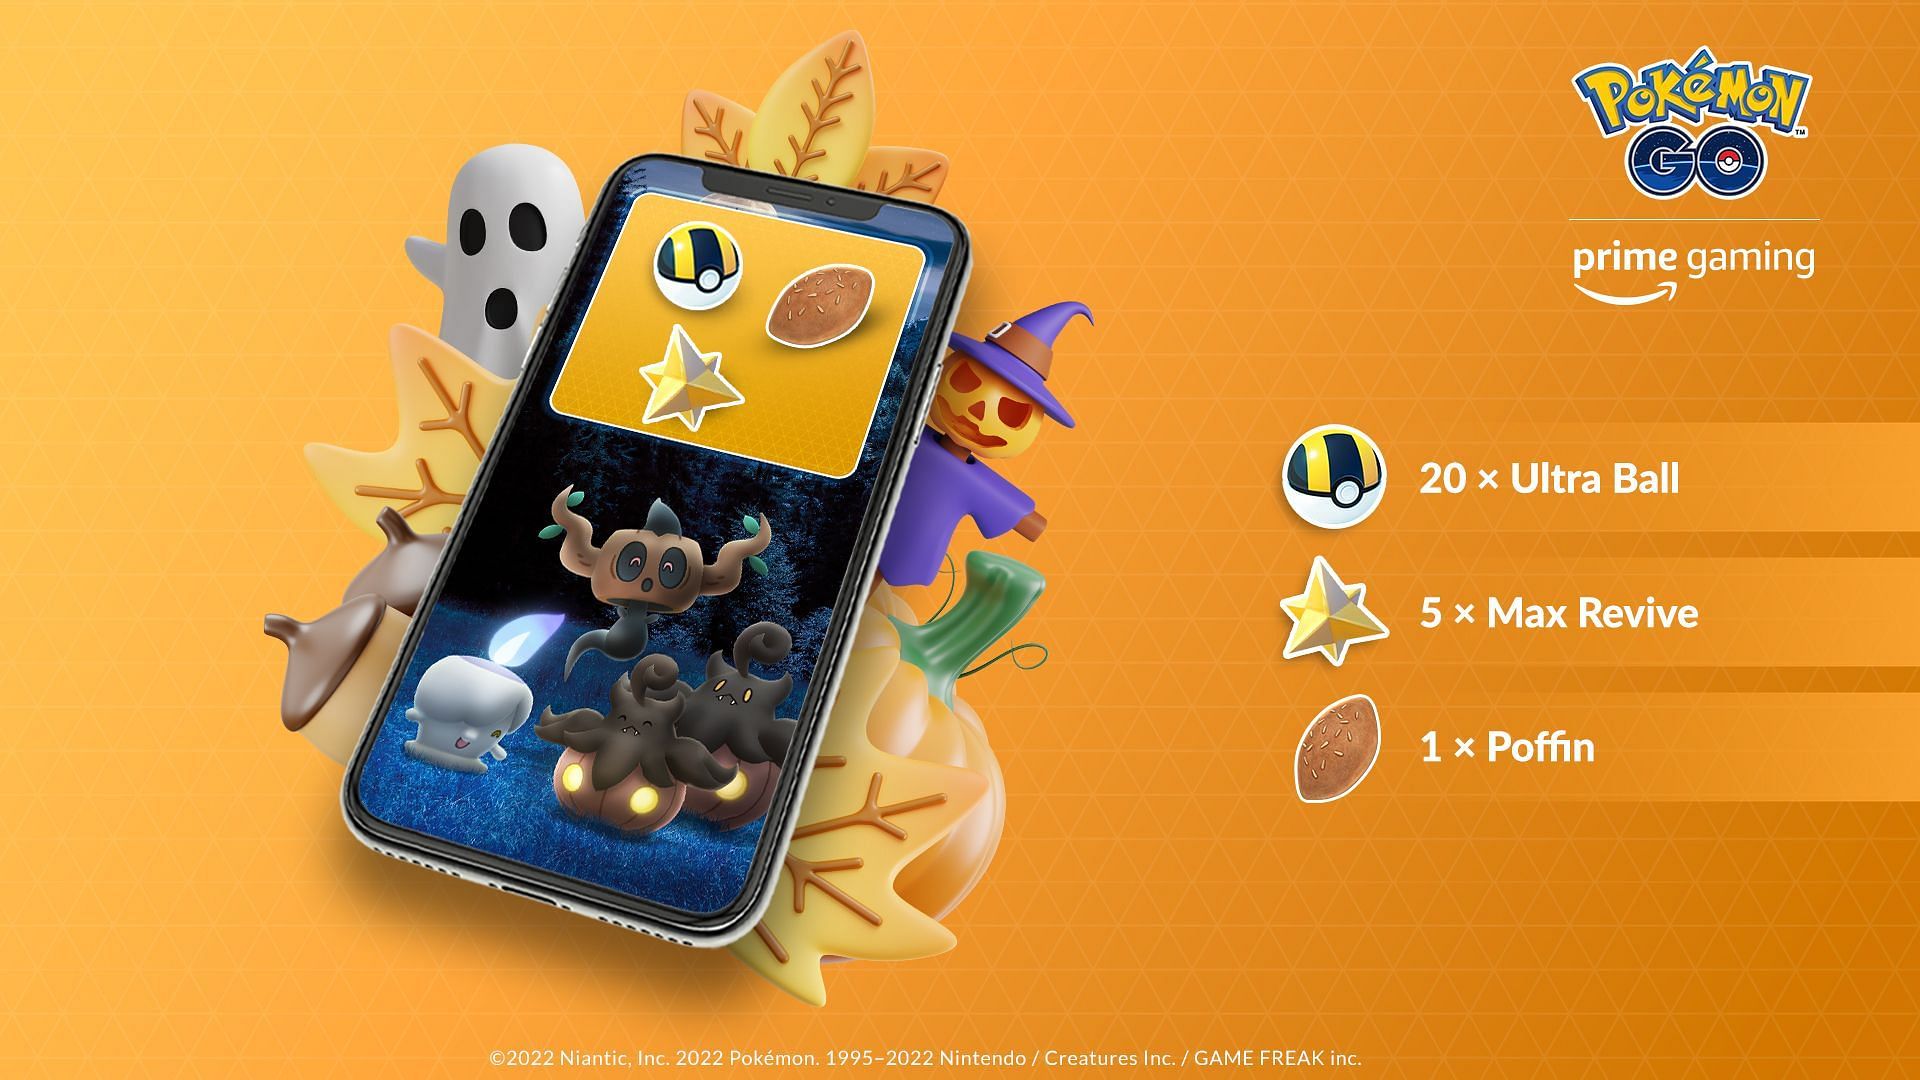 How to get Prime Gaming Halloween treat in Pokemon GO